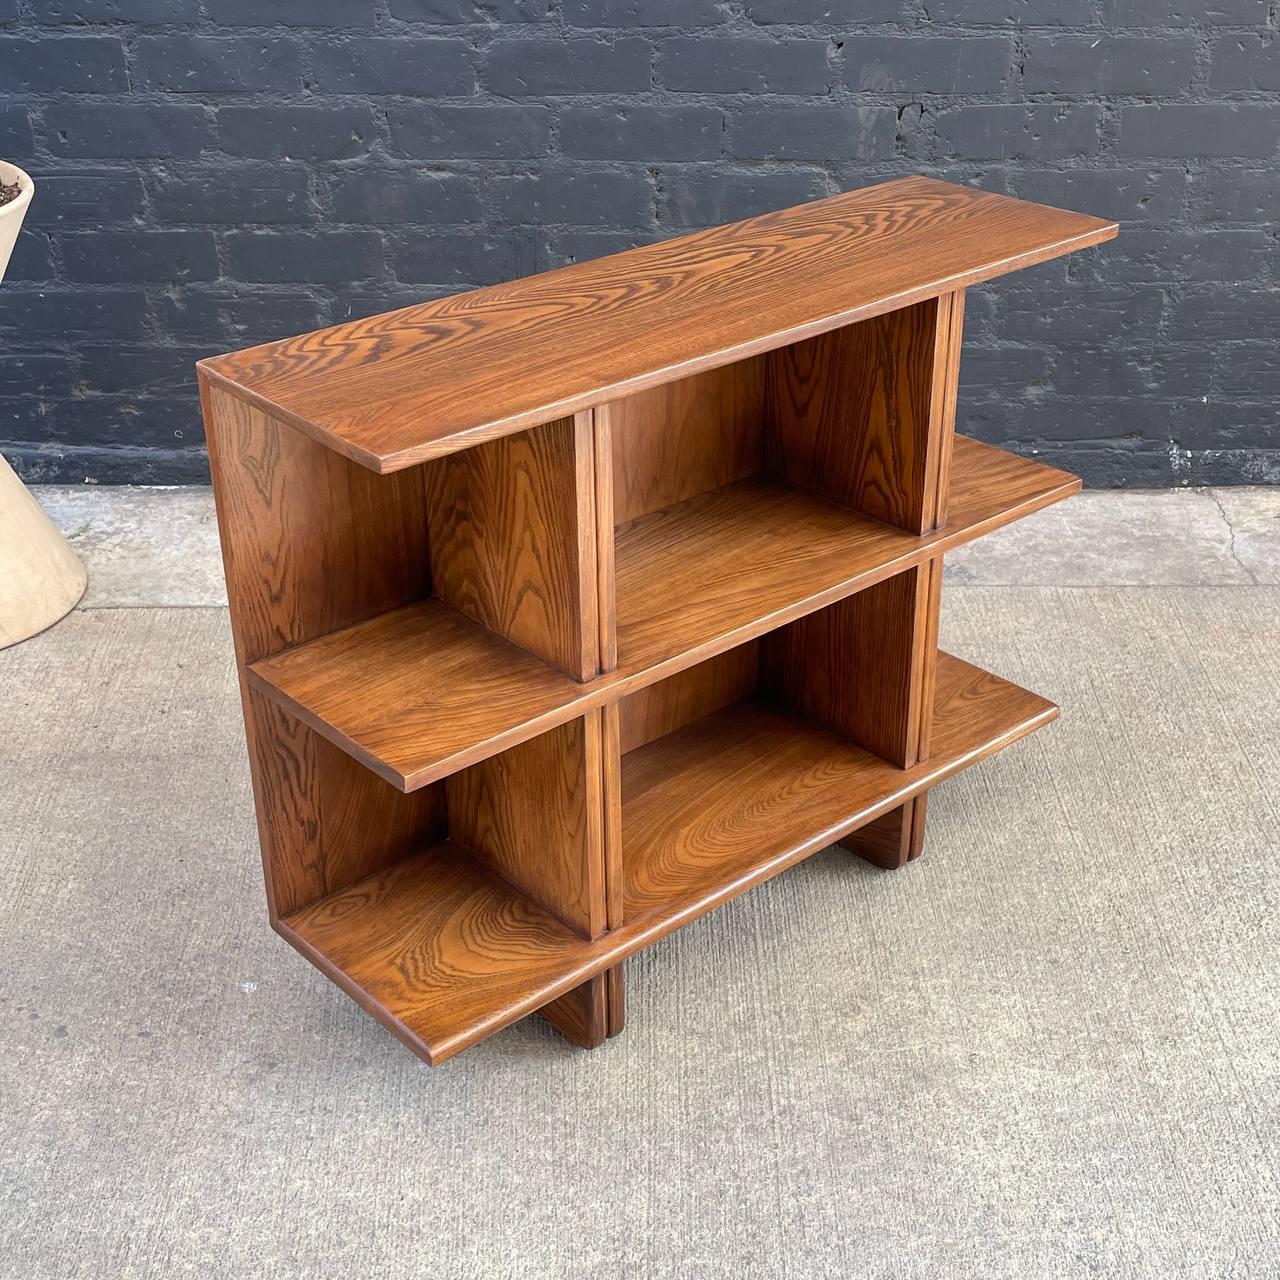 Newly Refinished - Mid-Century Modern 3-Tier Bookshelf Credenza

With over 15 years of experience, our workshop has followed a careful process of restoration, showcasing our passion and creativity for vintage designs that can seamlessly be